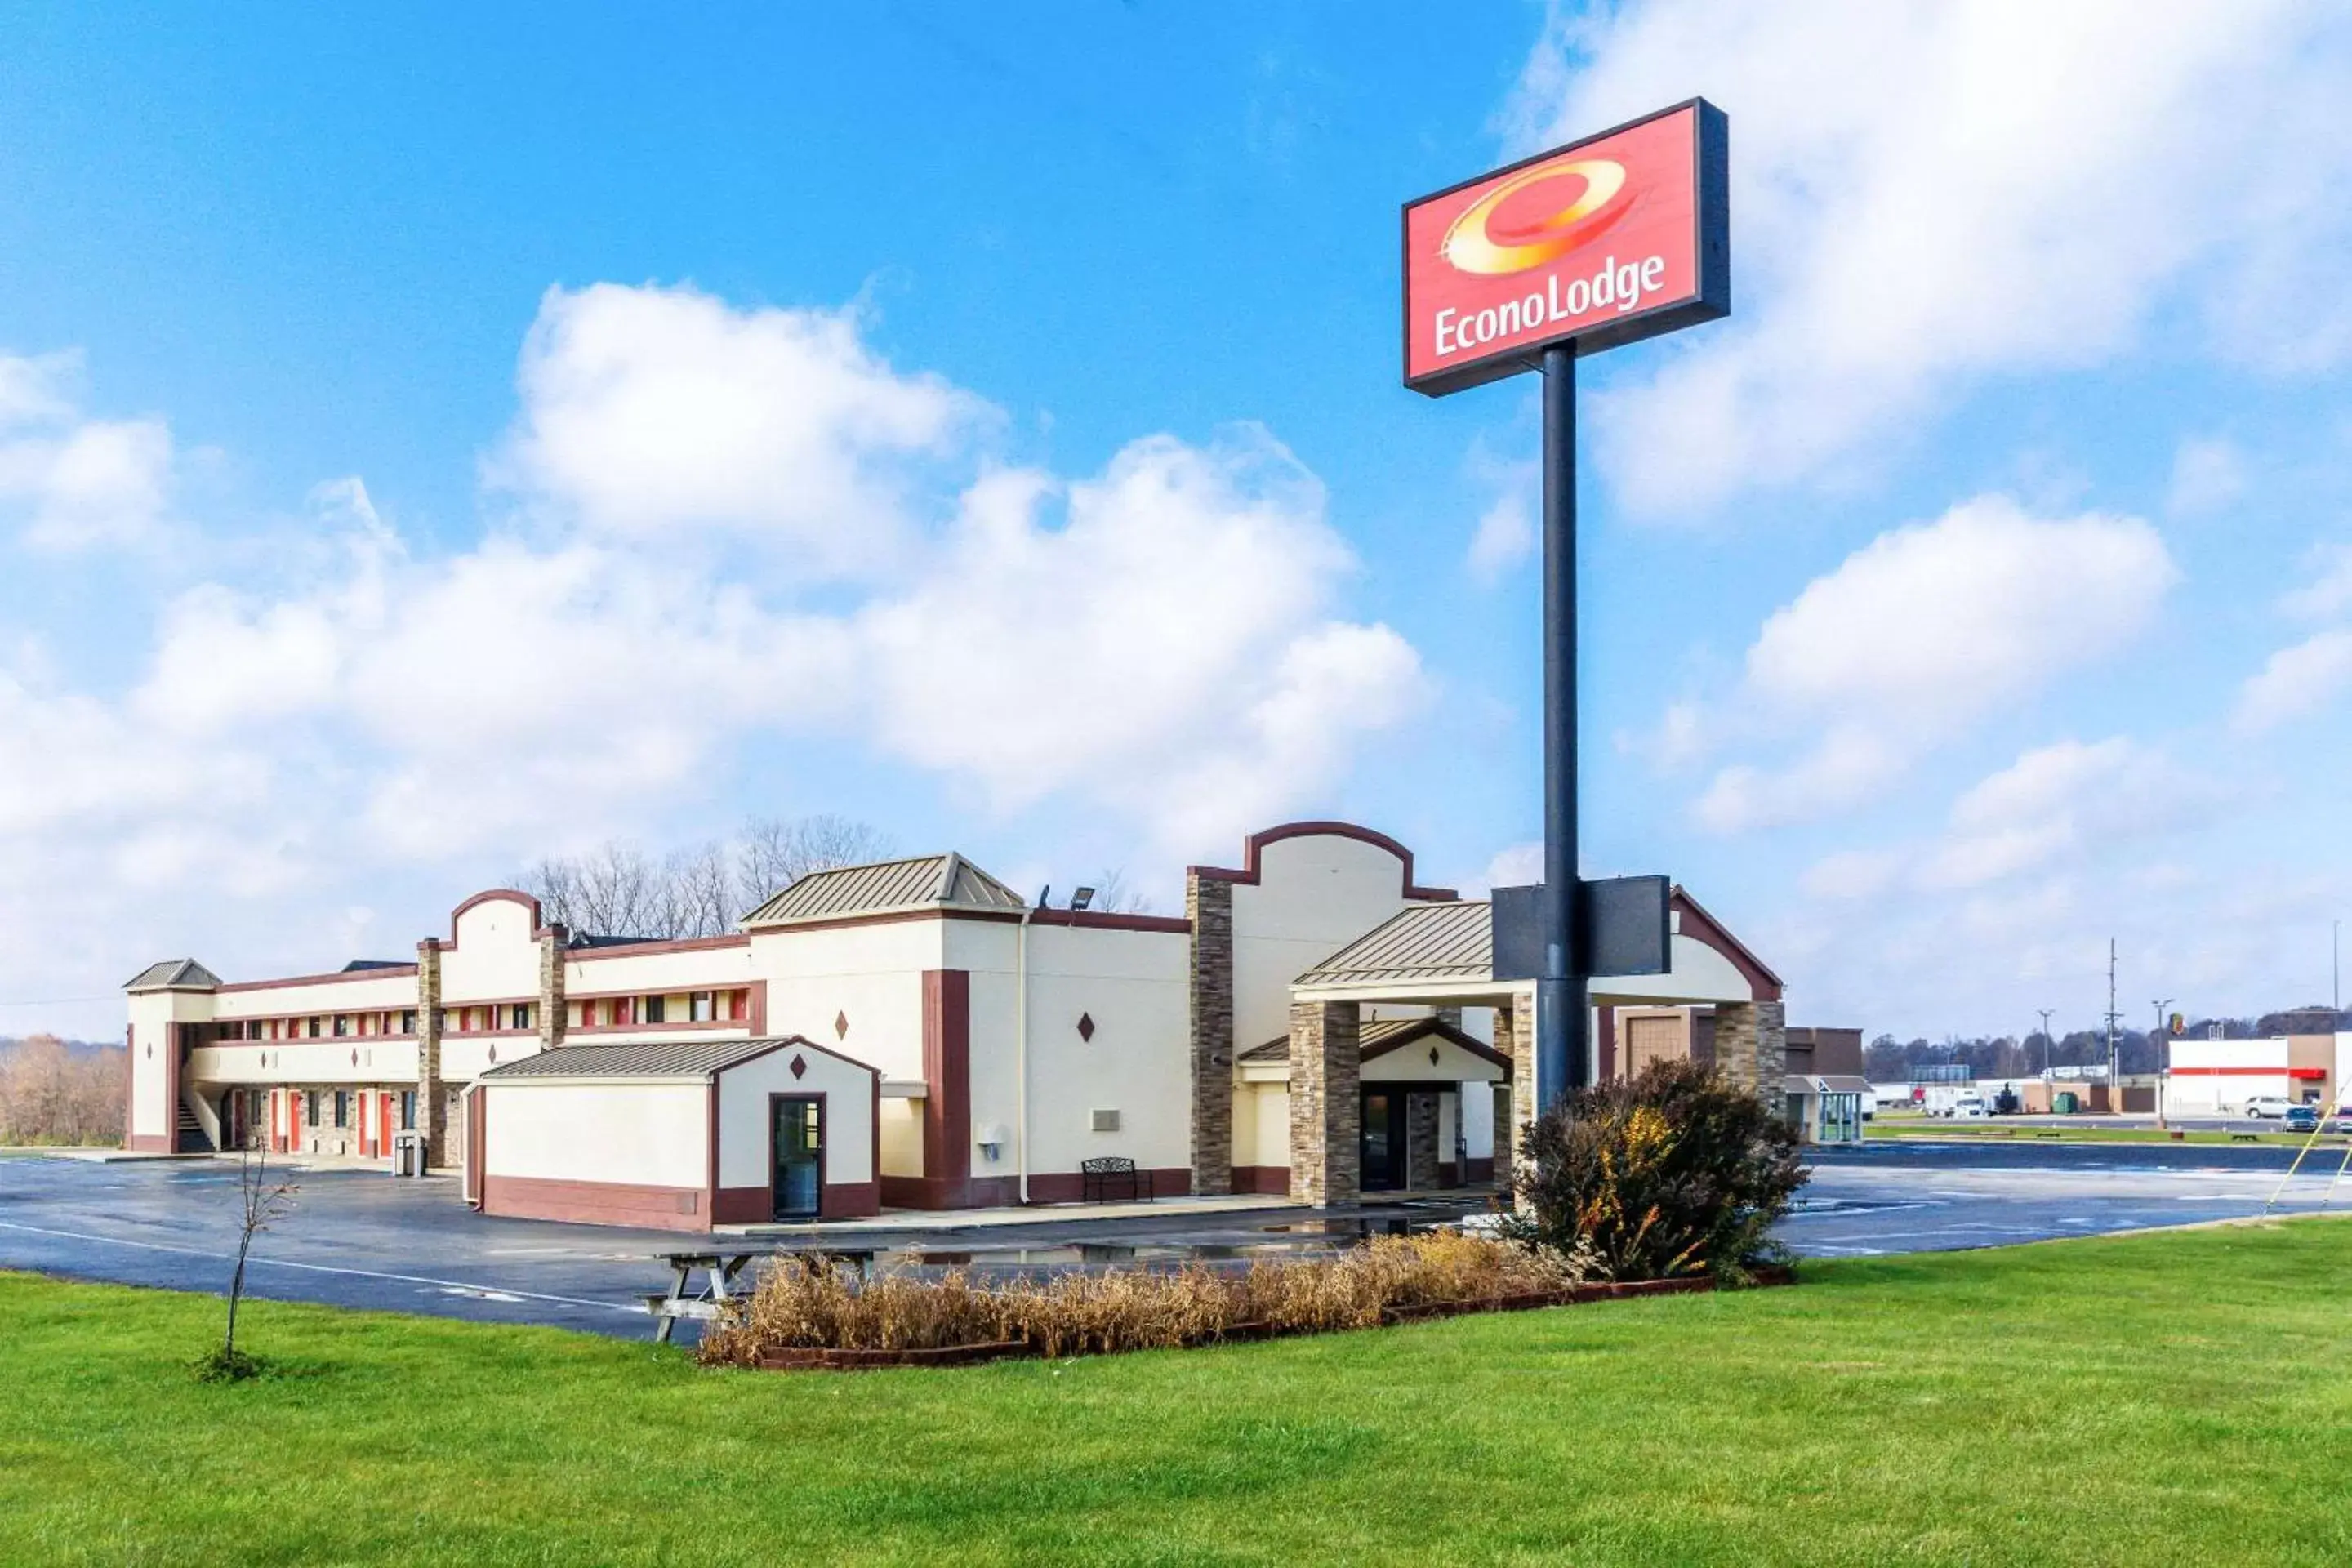 Property building in Econo Lodge Cloverdale